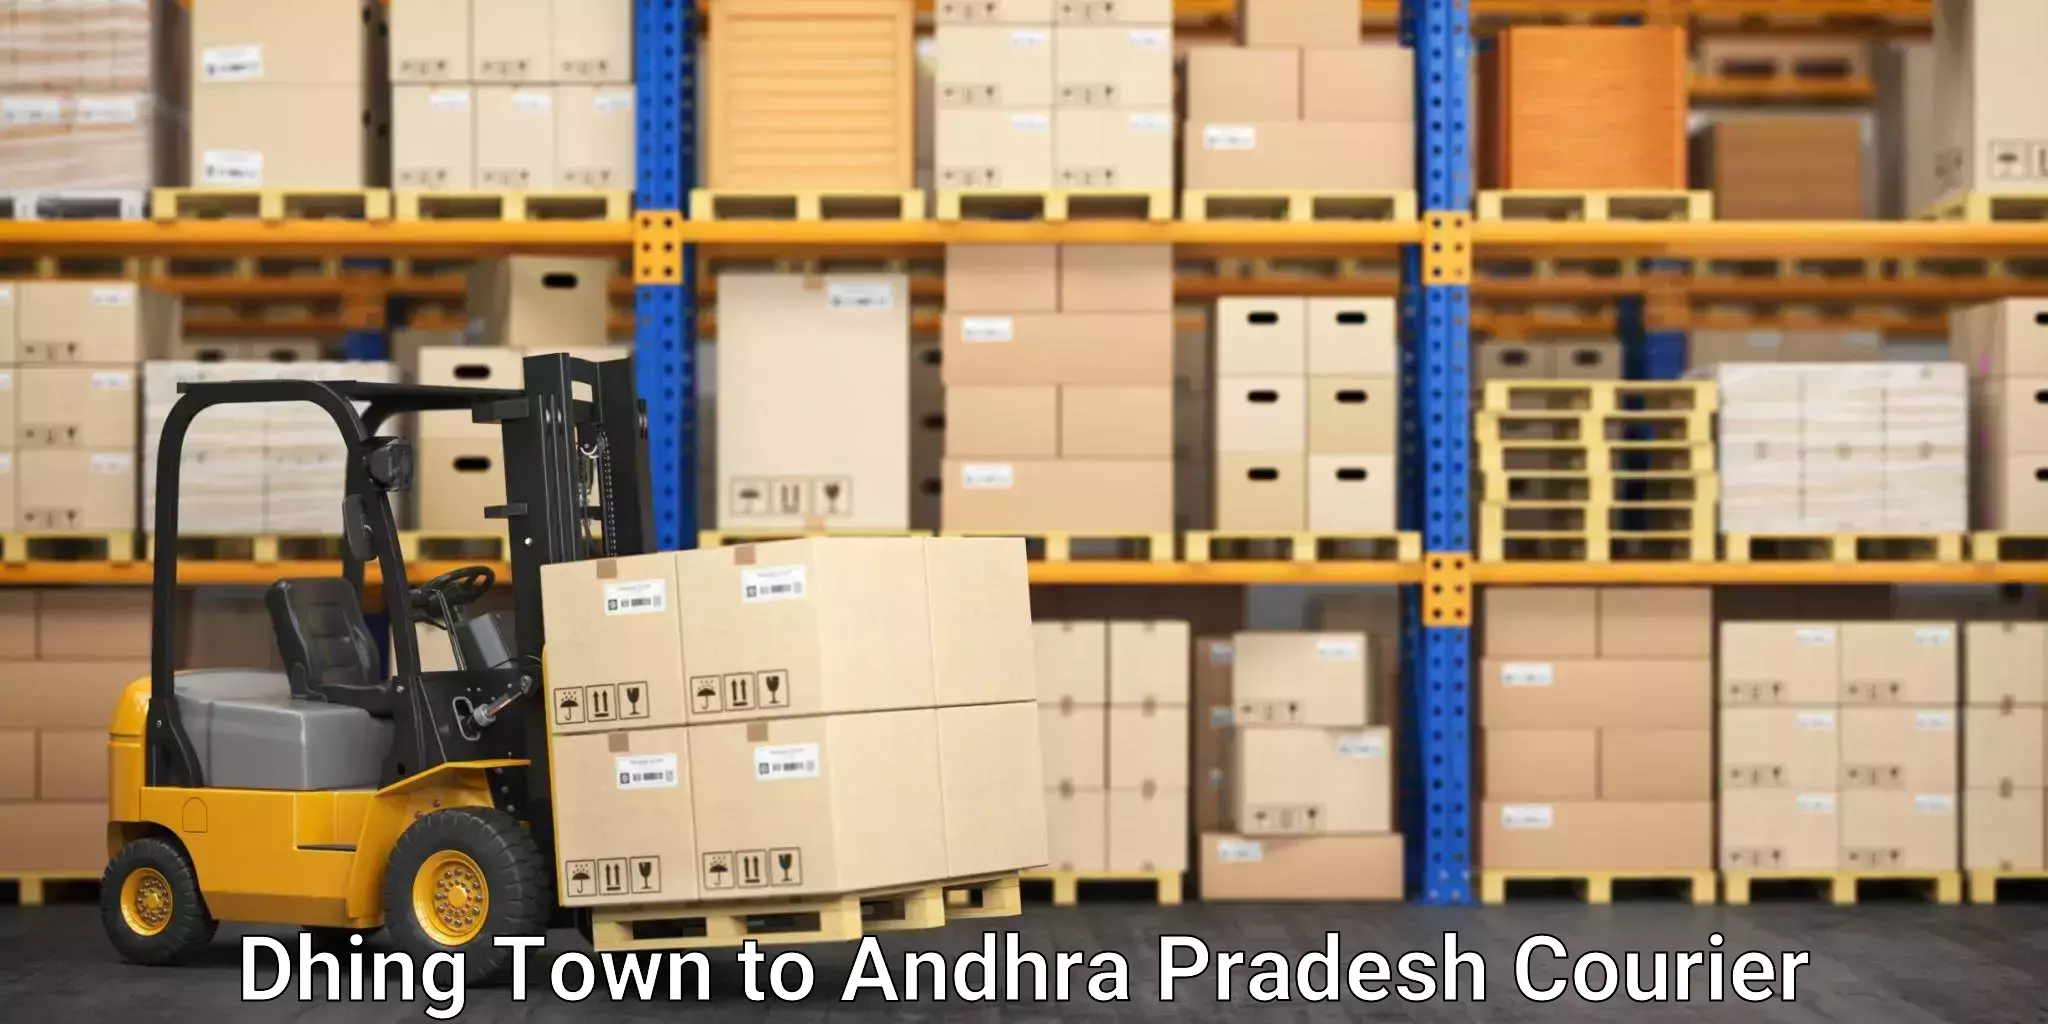 Specialized shipment handling Dhing Town to Devarapalli